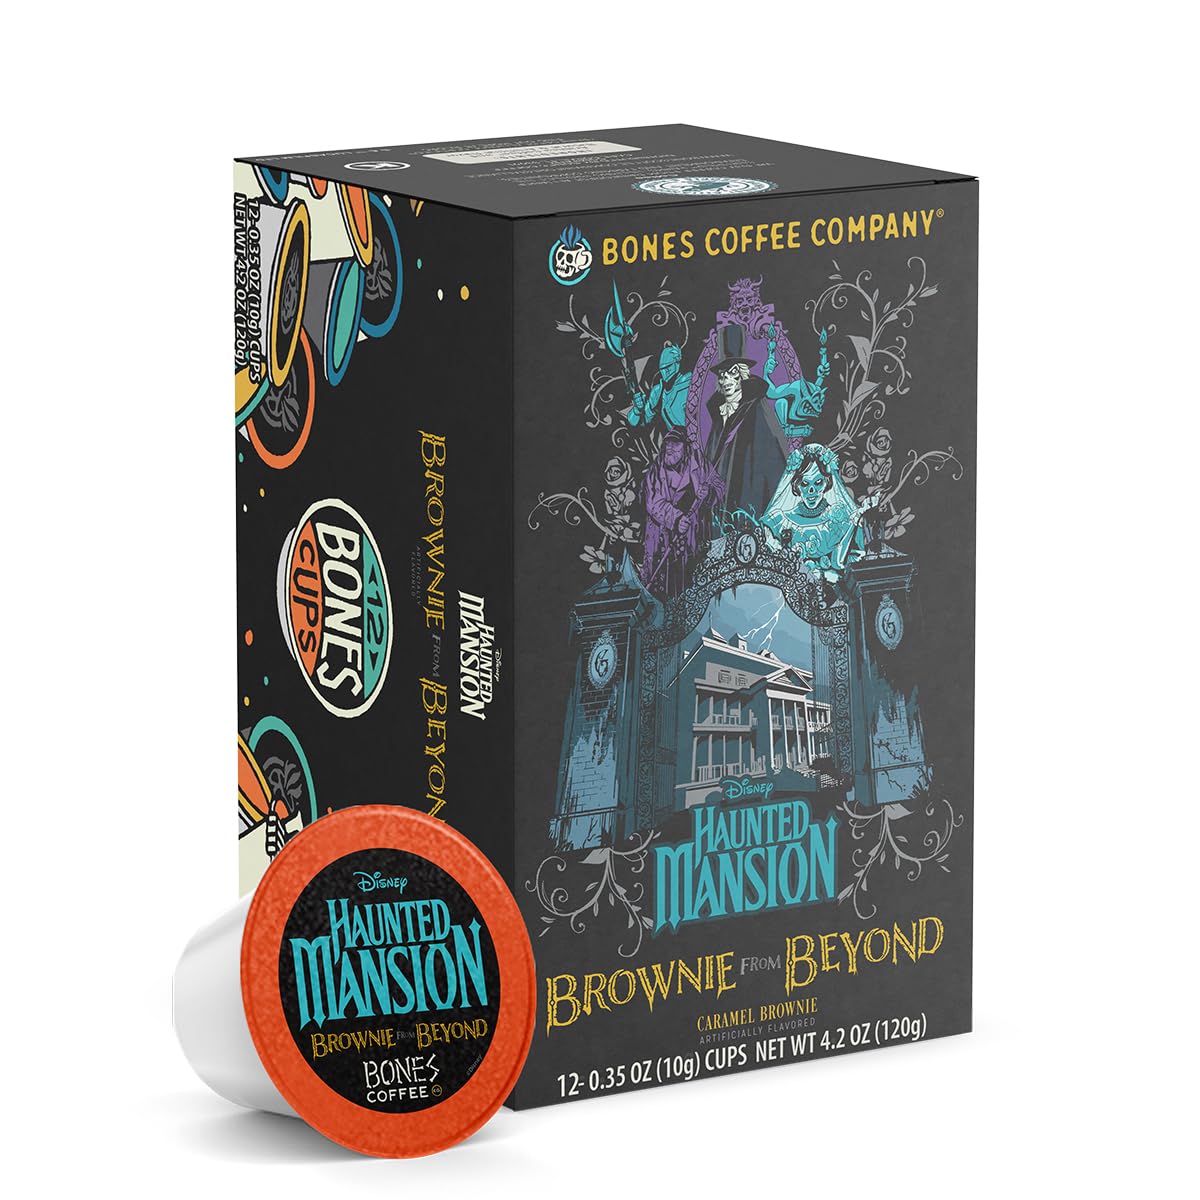 Bones Coffee Company Flavored Coffee Bones Cups Brownie From Beyond Flavored Pods | 12ct Single-Serve Coffee Pods Inspired by Disney's Haunted Mansion